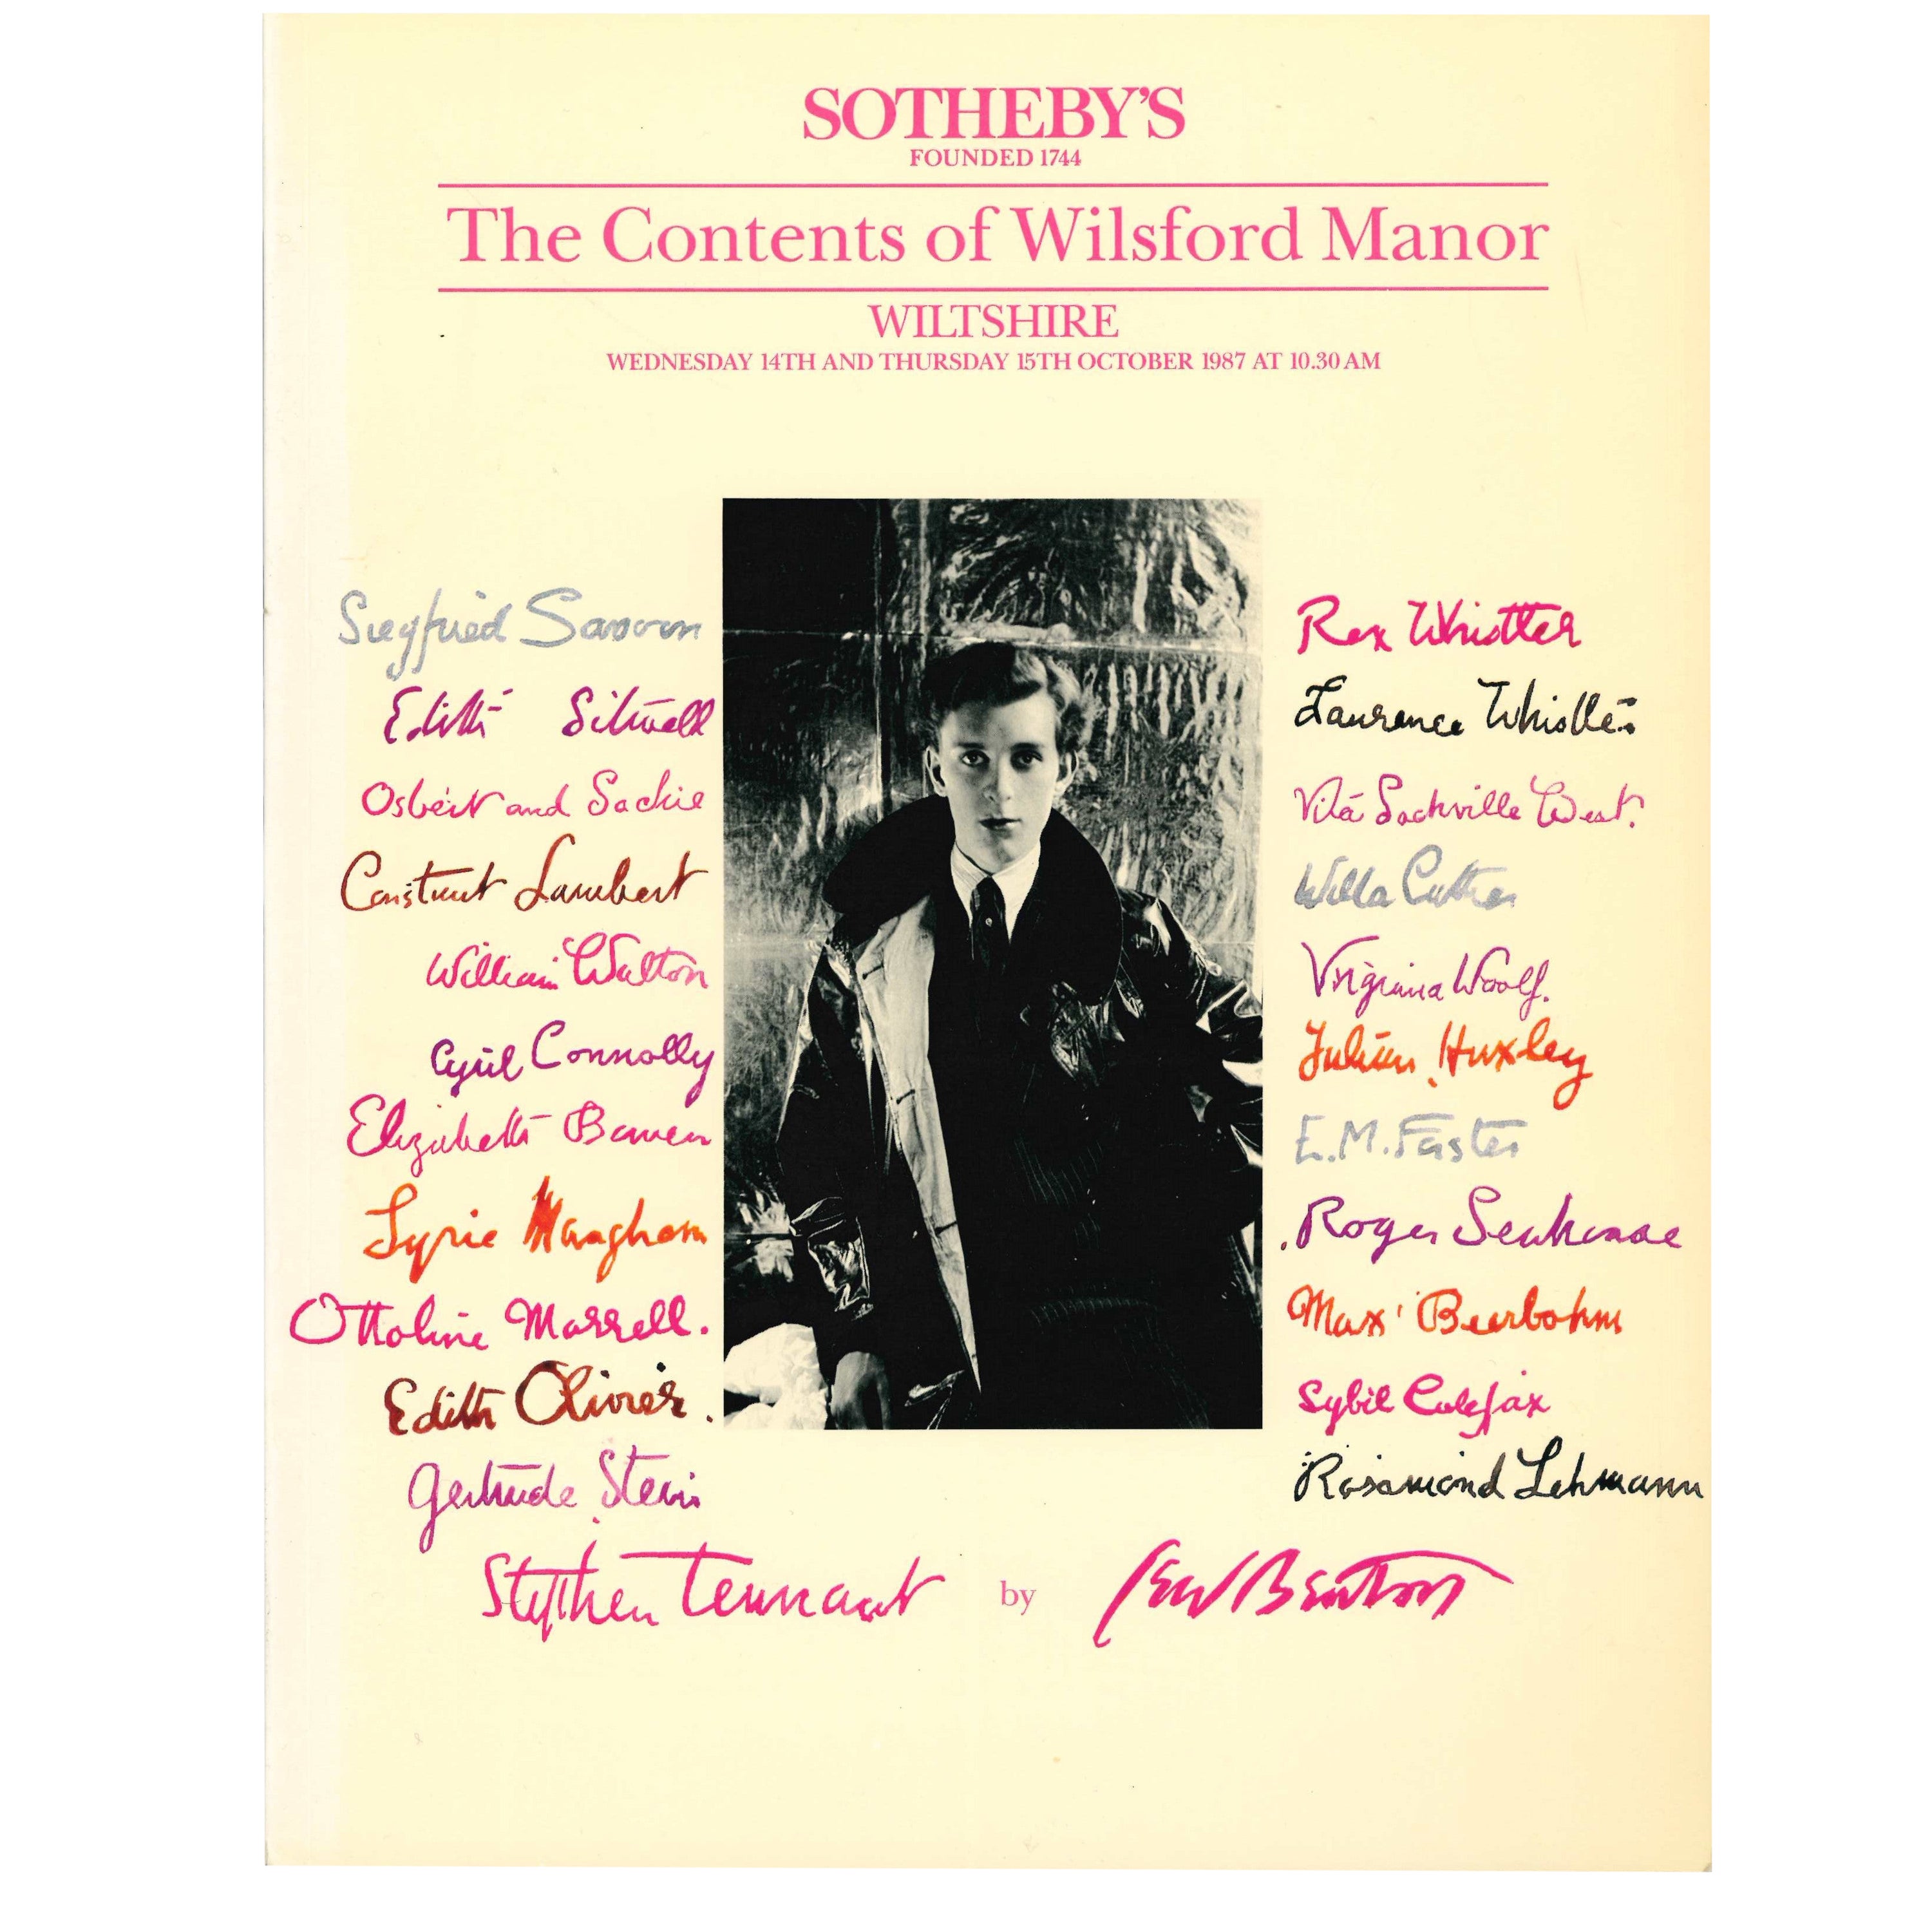 Sotheby's Sale Catalogue, The Contents of Wilsford Manor